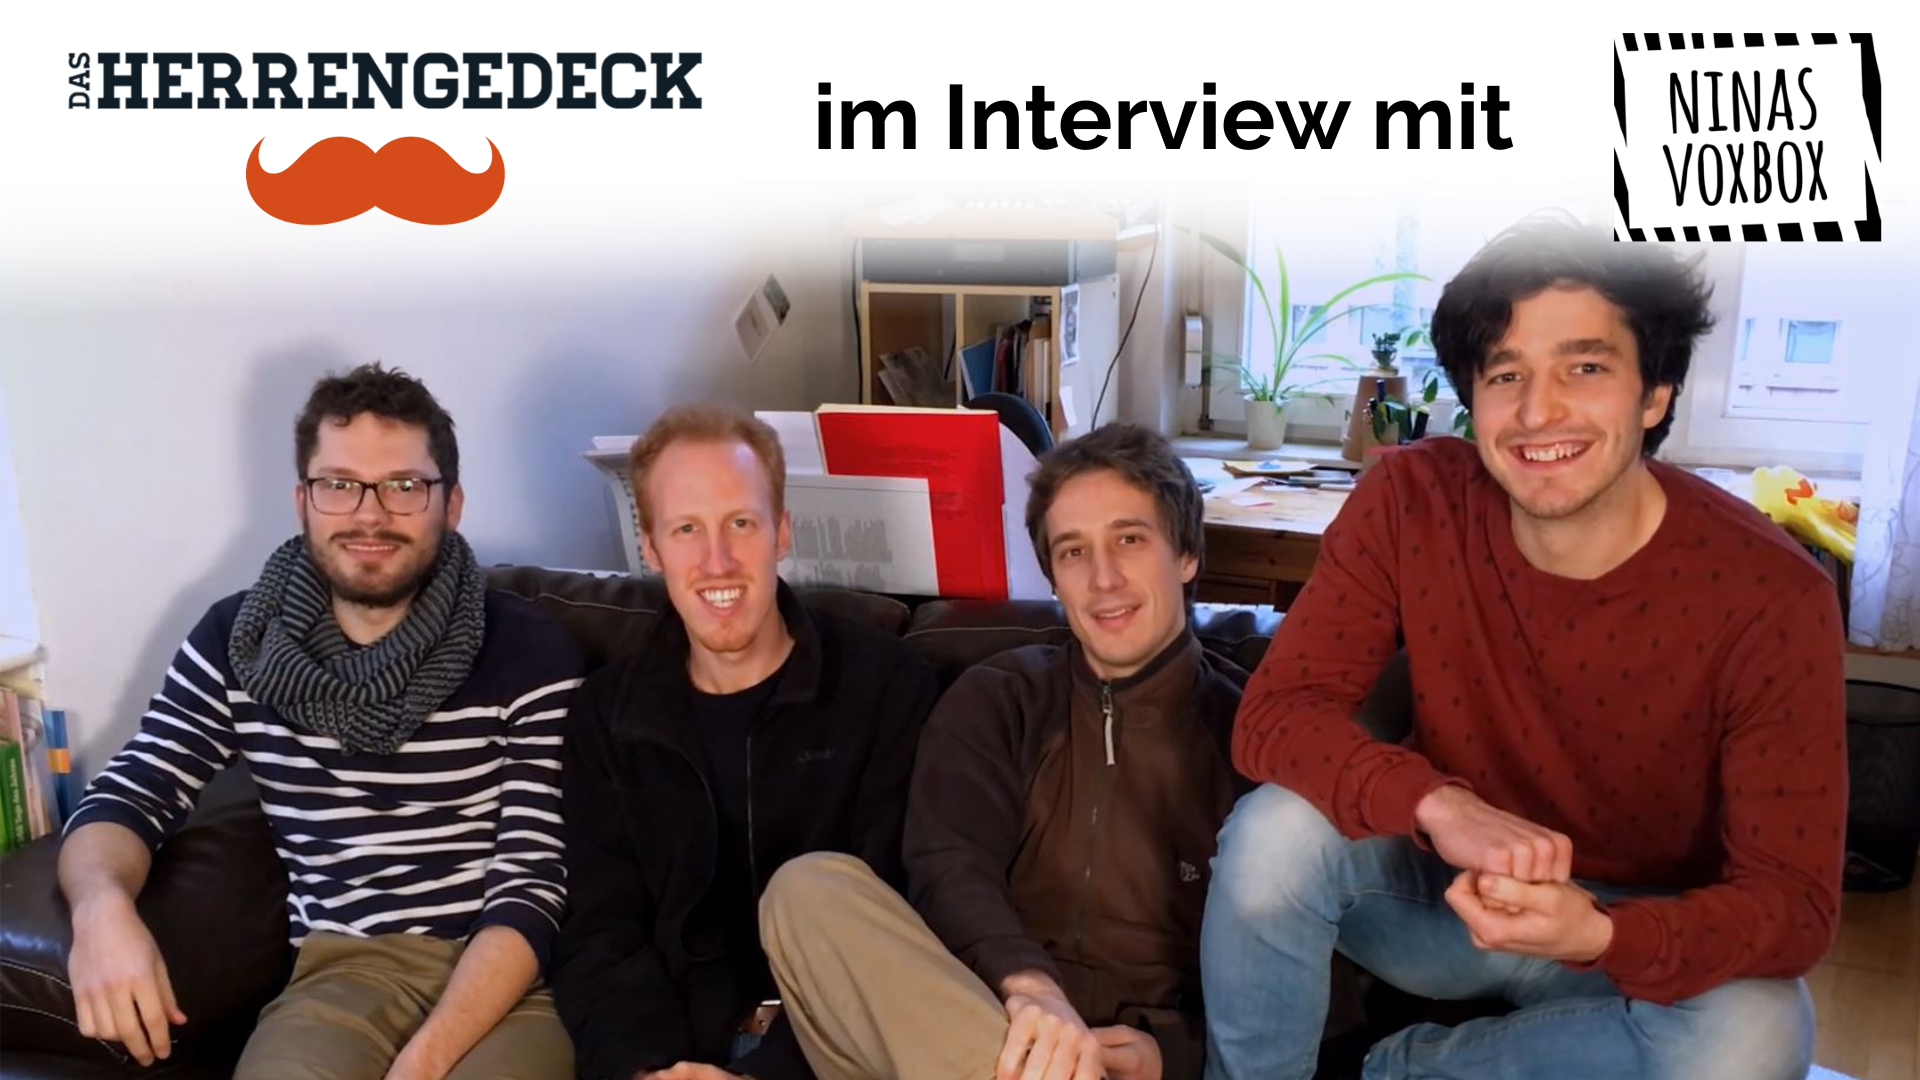 You are currently viewing Das Herrengedeck im Interview